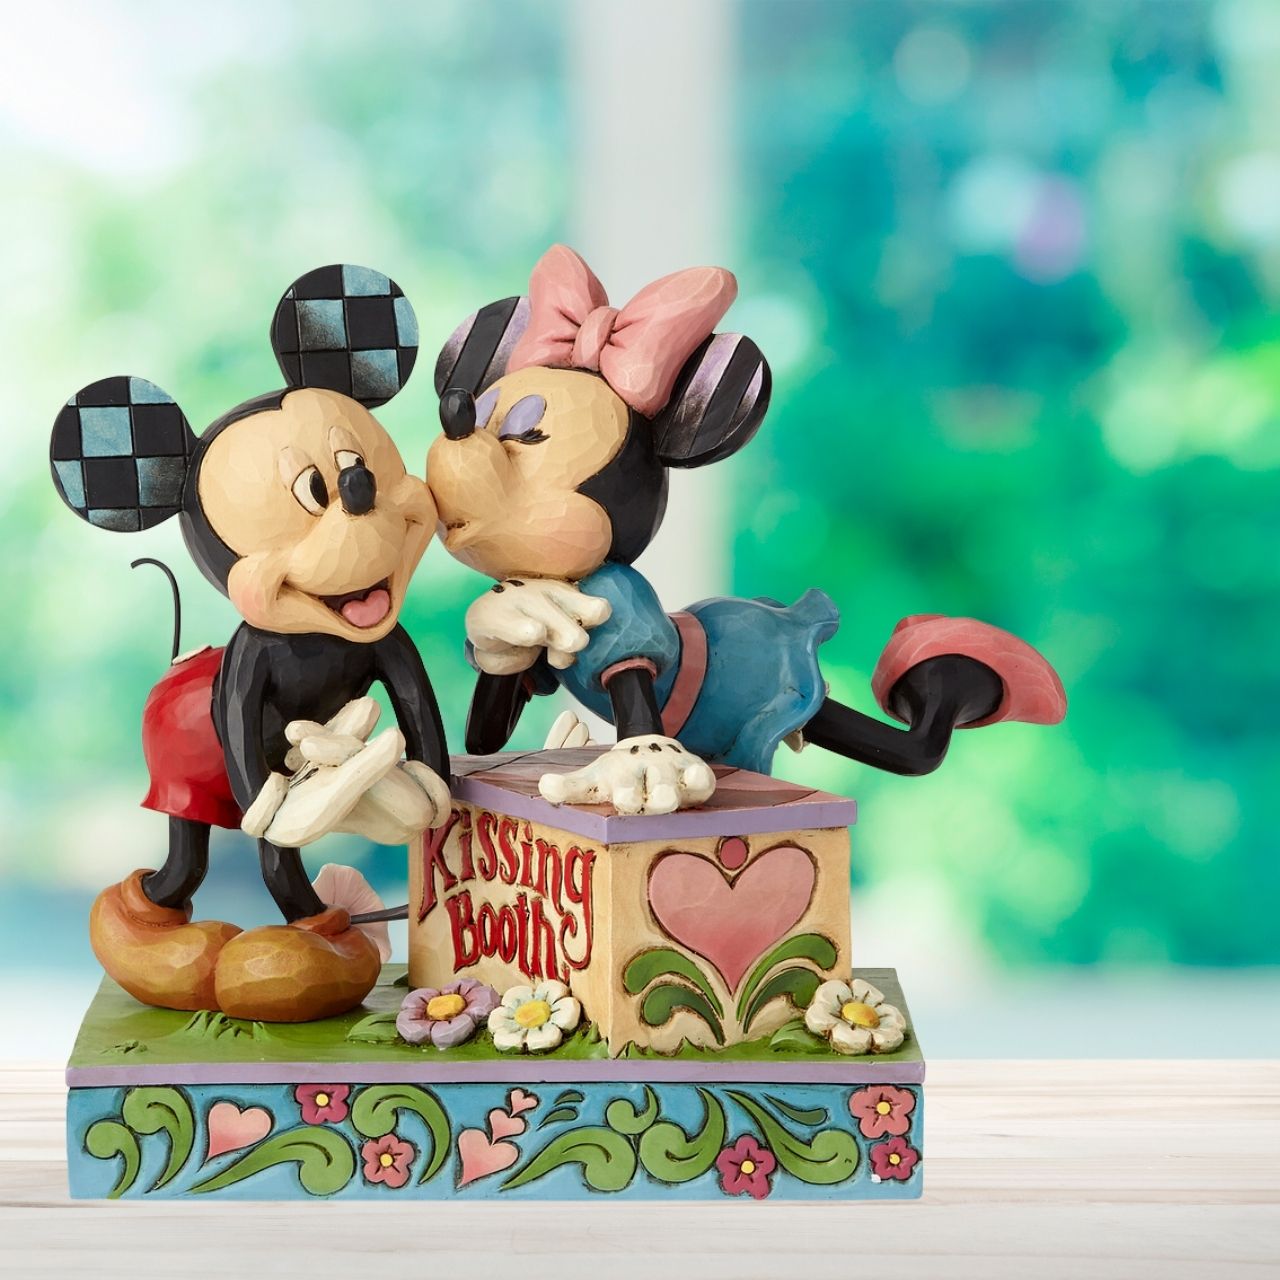 Jim Shore Kissing Booth Mickey Mouse and Minnie Mouse  Minnie leans over a kissing booth to plant a smooch on one very smitten Mickey in this cheeky scene by Jim Shore. Handcrafted in his unique folk art style, the cast stone design features whimsical rosemaling and quilt patterns. 